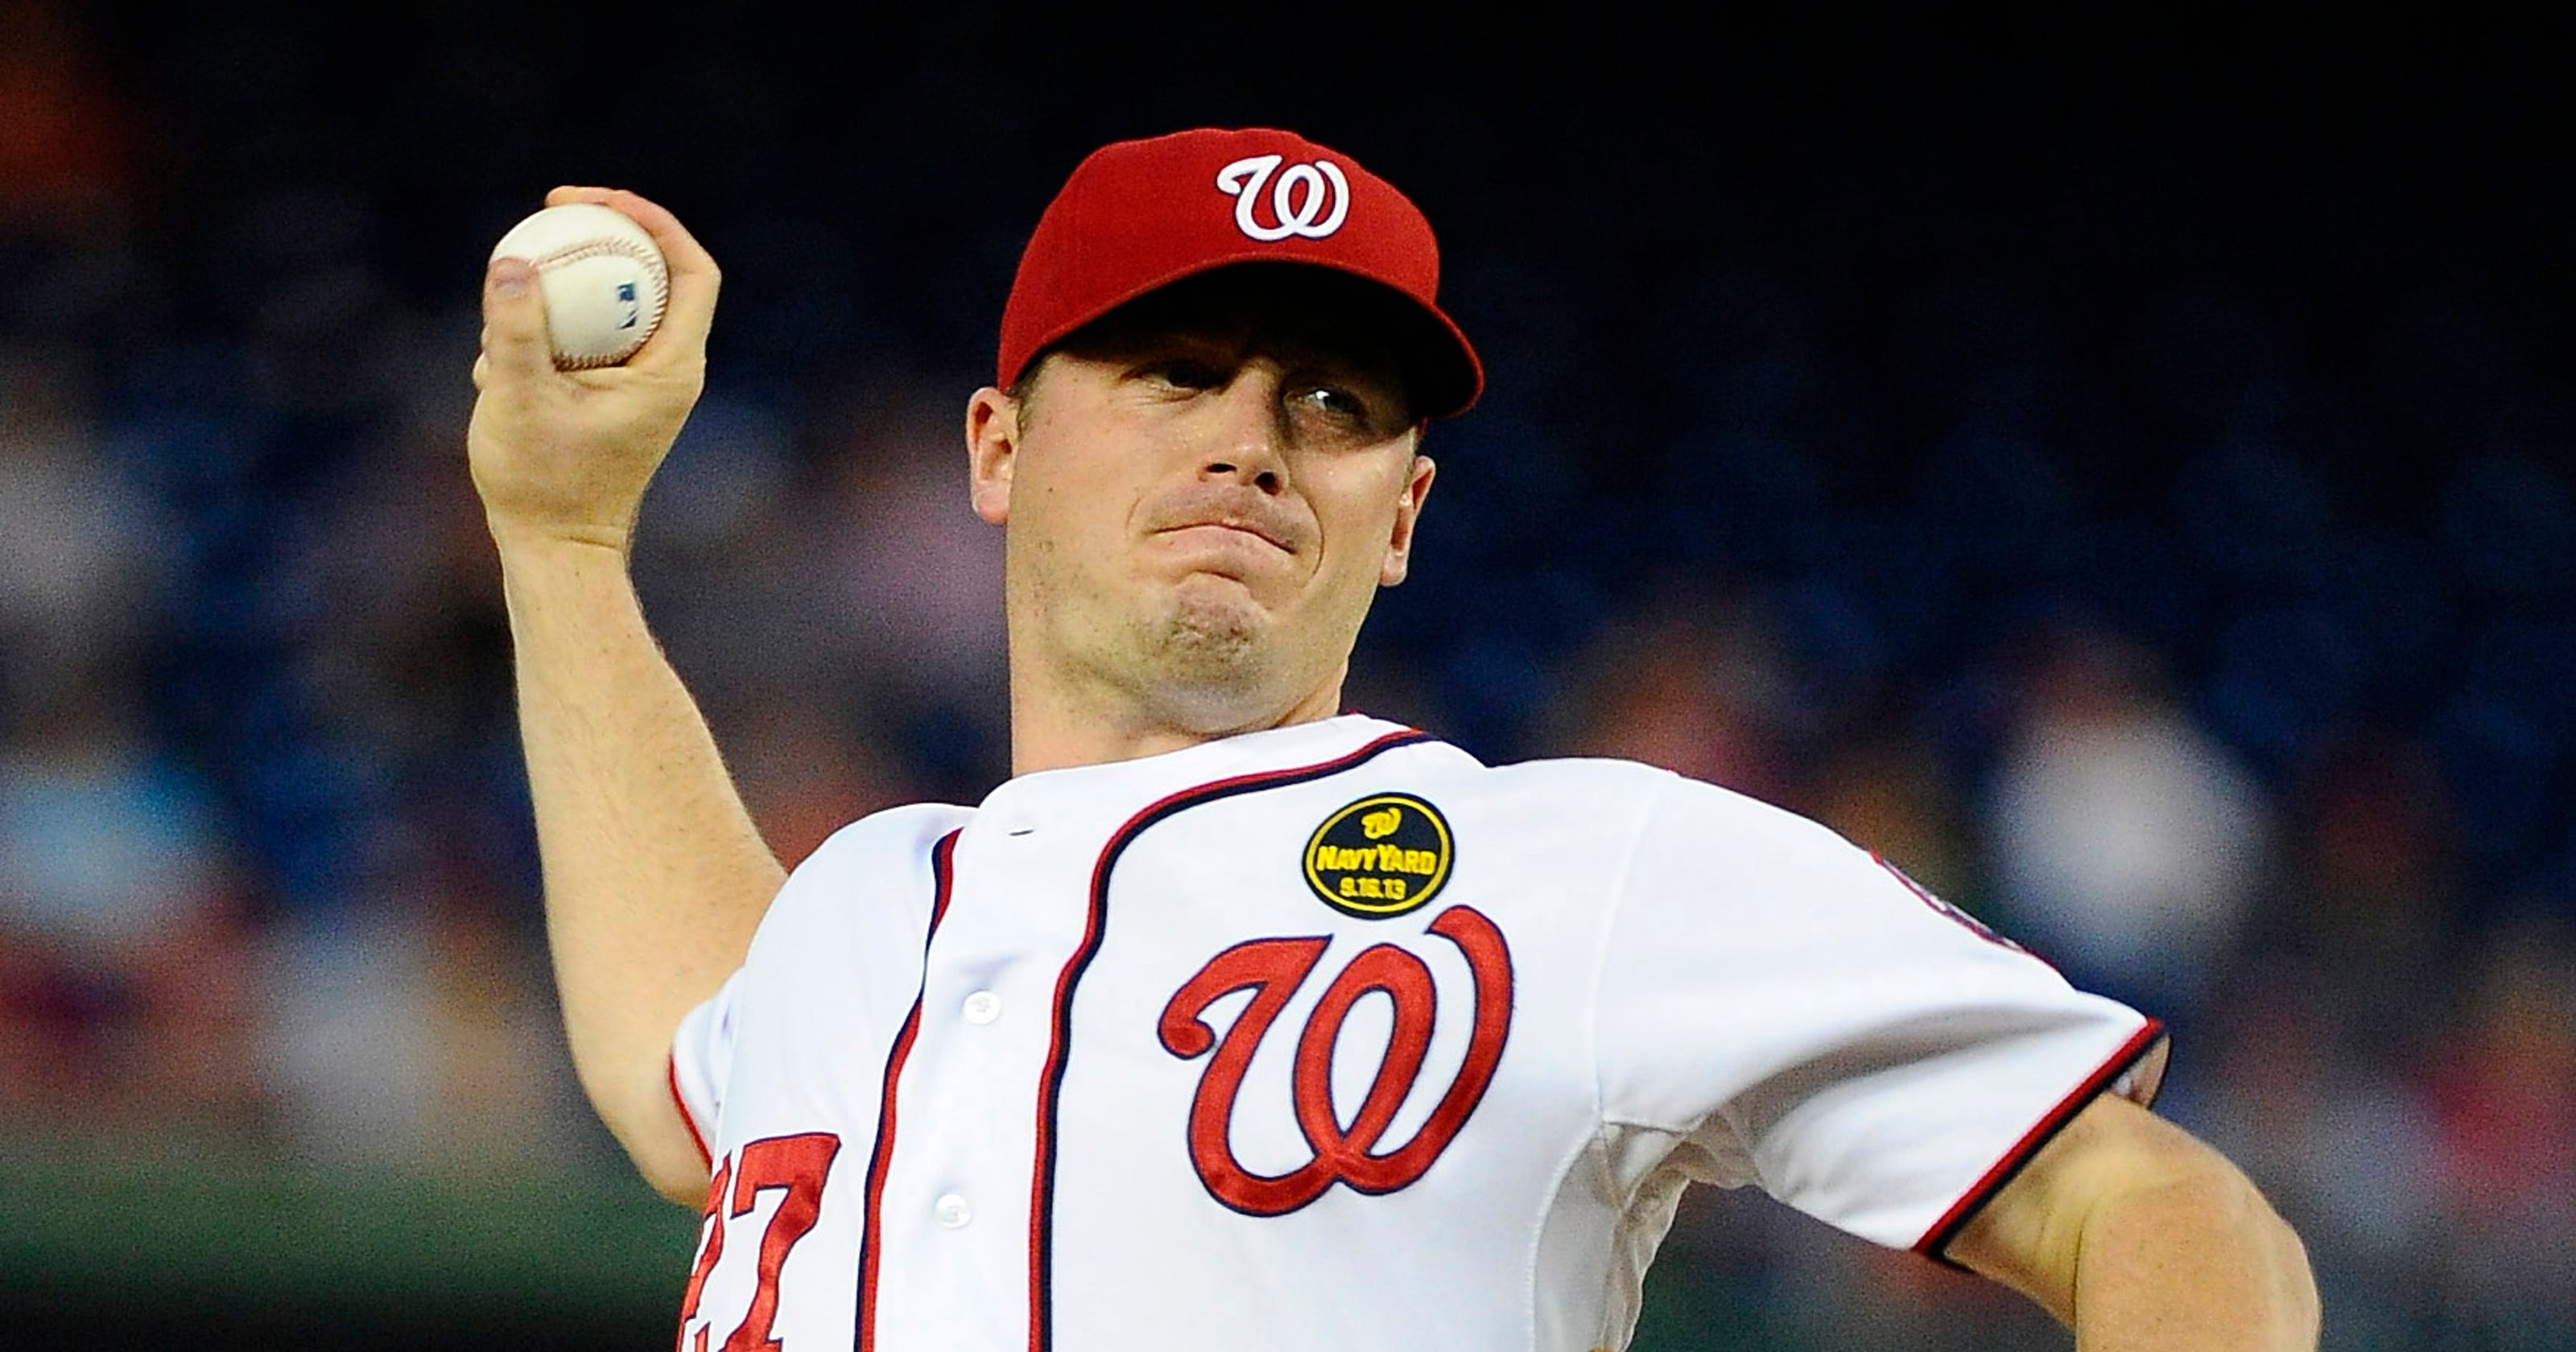 Jordan Zimmermann keeps Nationals' slim playoff hopes alive with 19th win